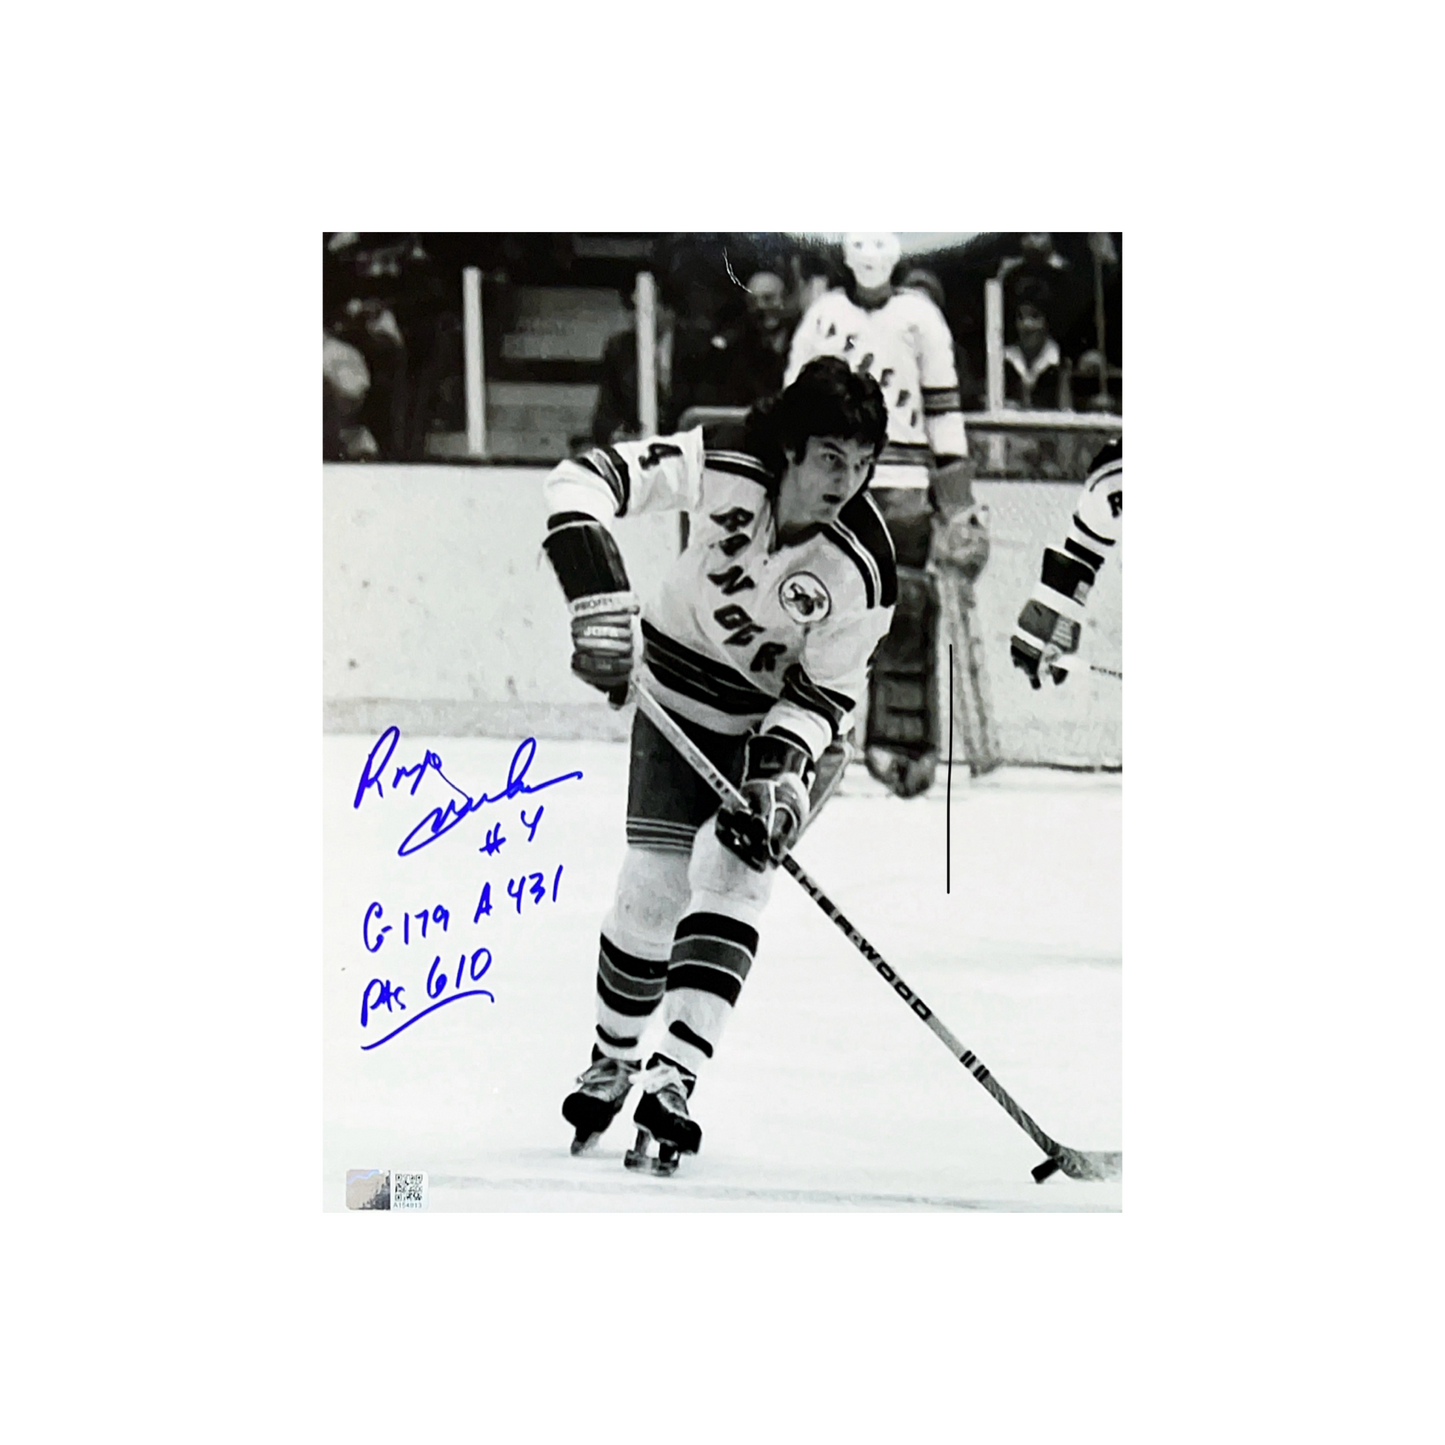 Ron Greschner Autographed New York Rangers B&W Skating 8x10 “G-179, A-431, Pts-610” Inscriptions Steiner CX